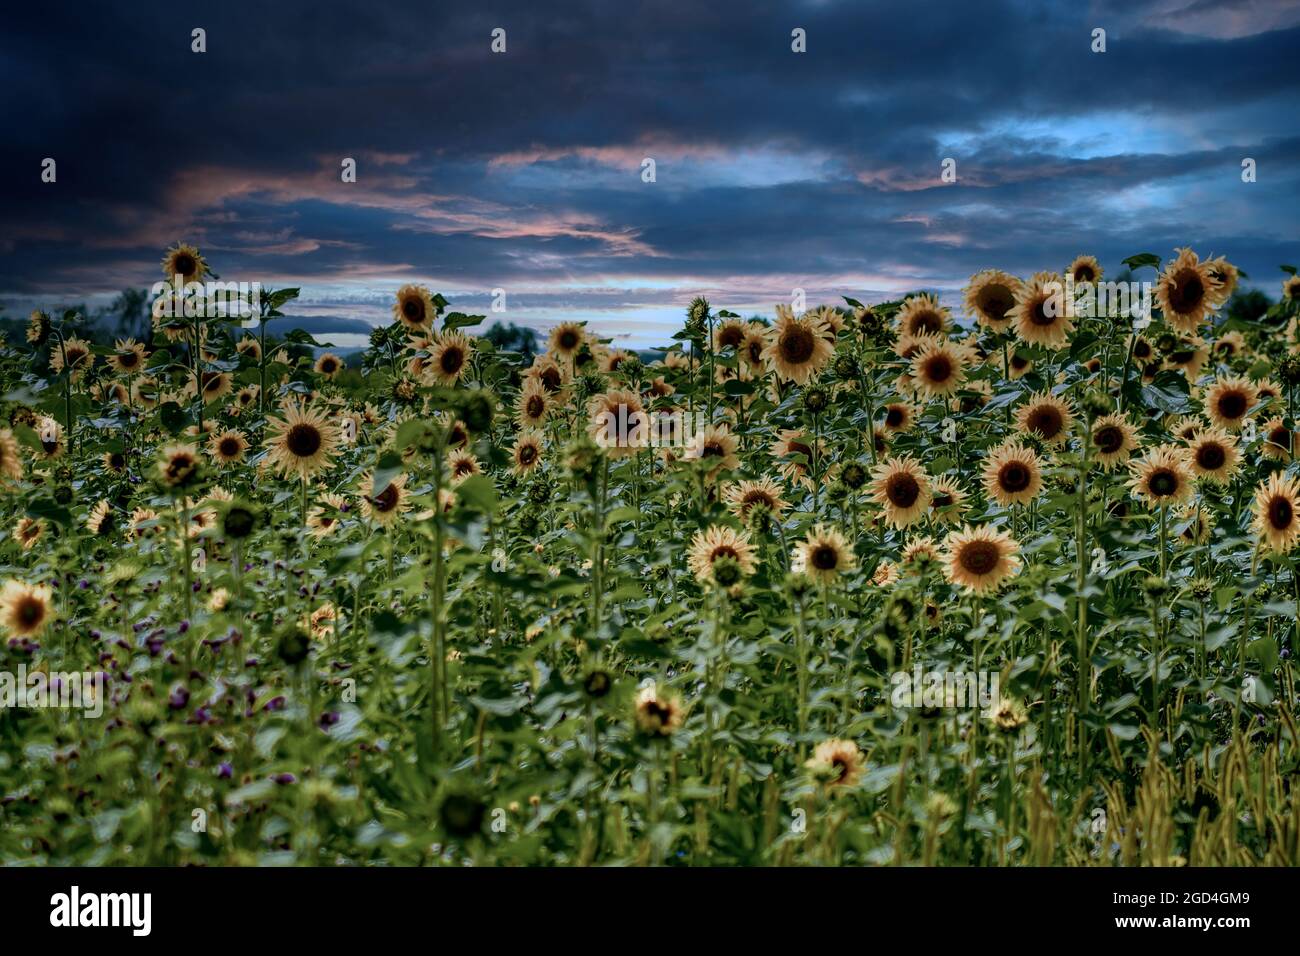 Flora : Sunflowers in the evening Stock Photo